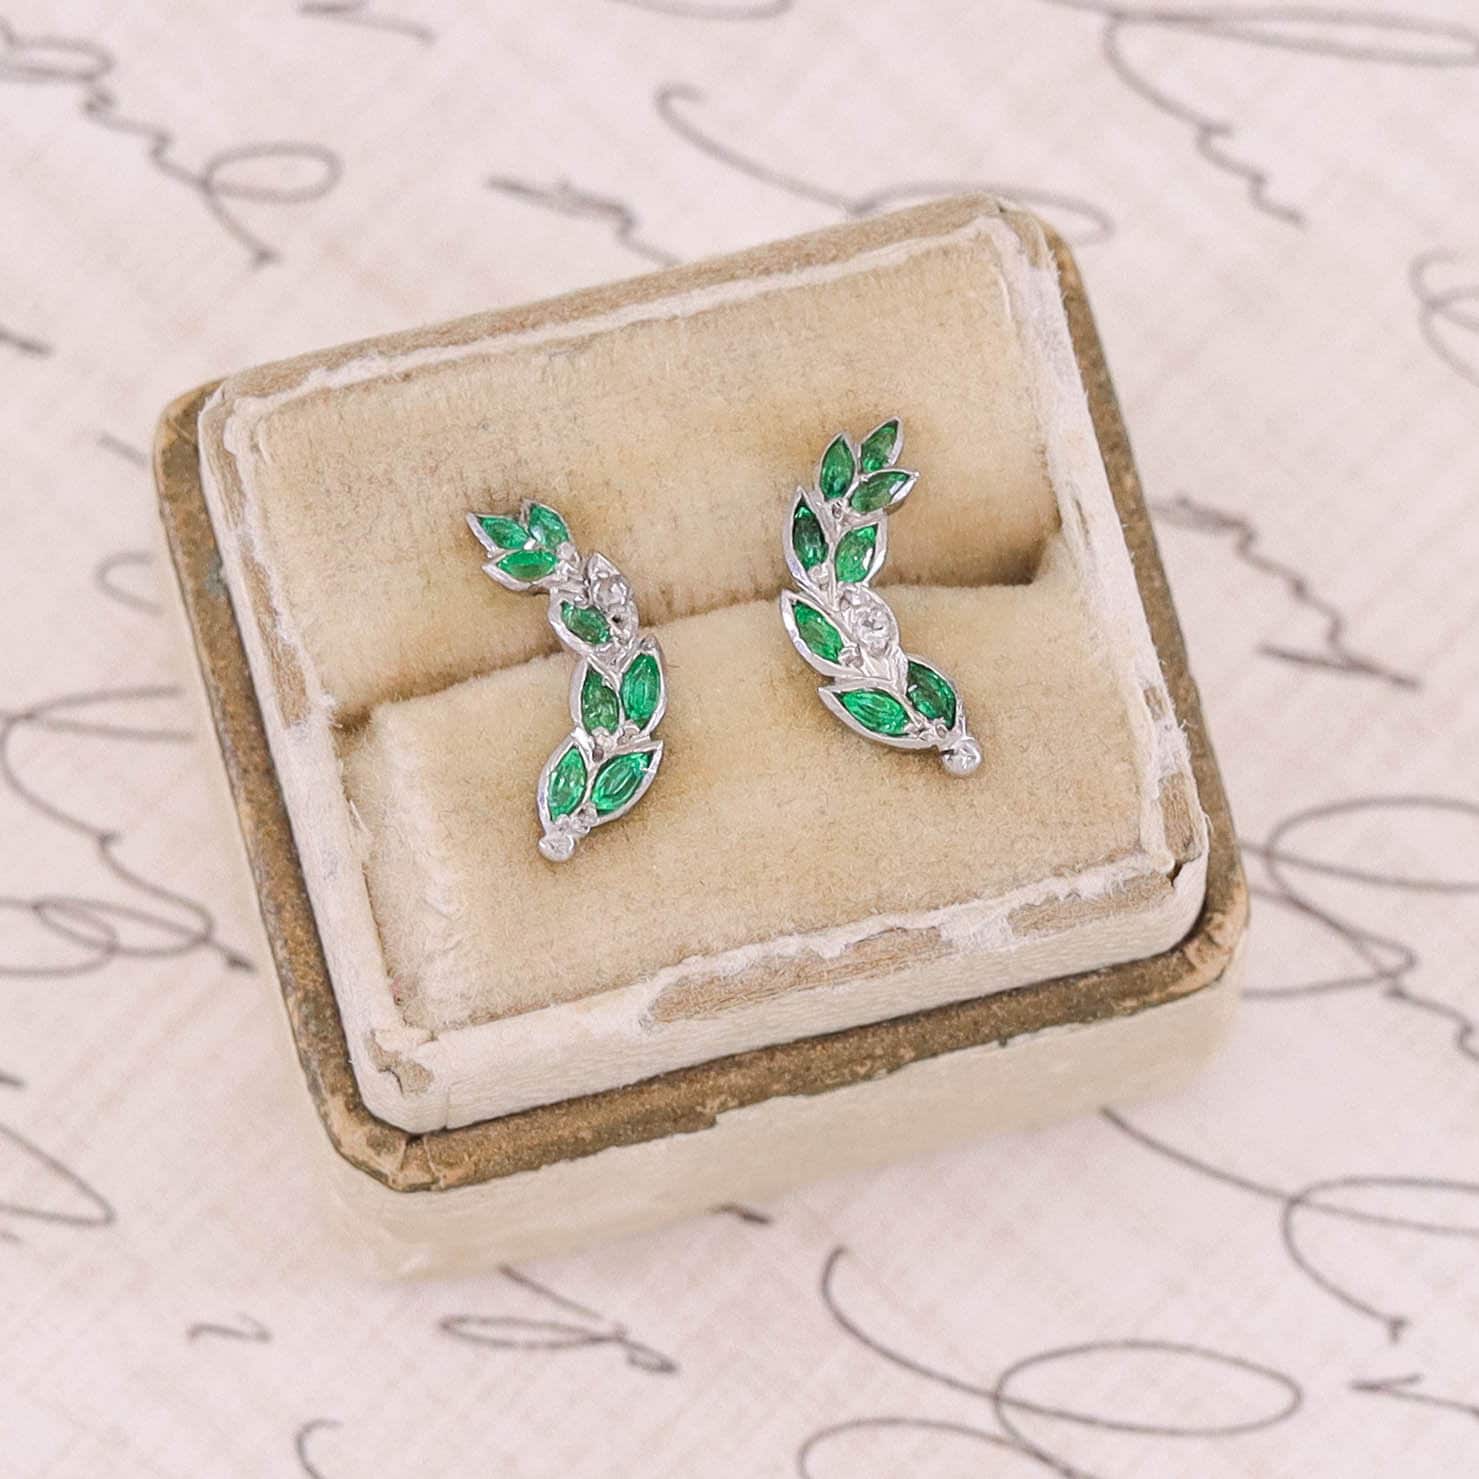 Emerald and Diamond Climber Earrings of 18k White Gold